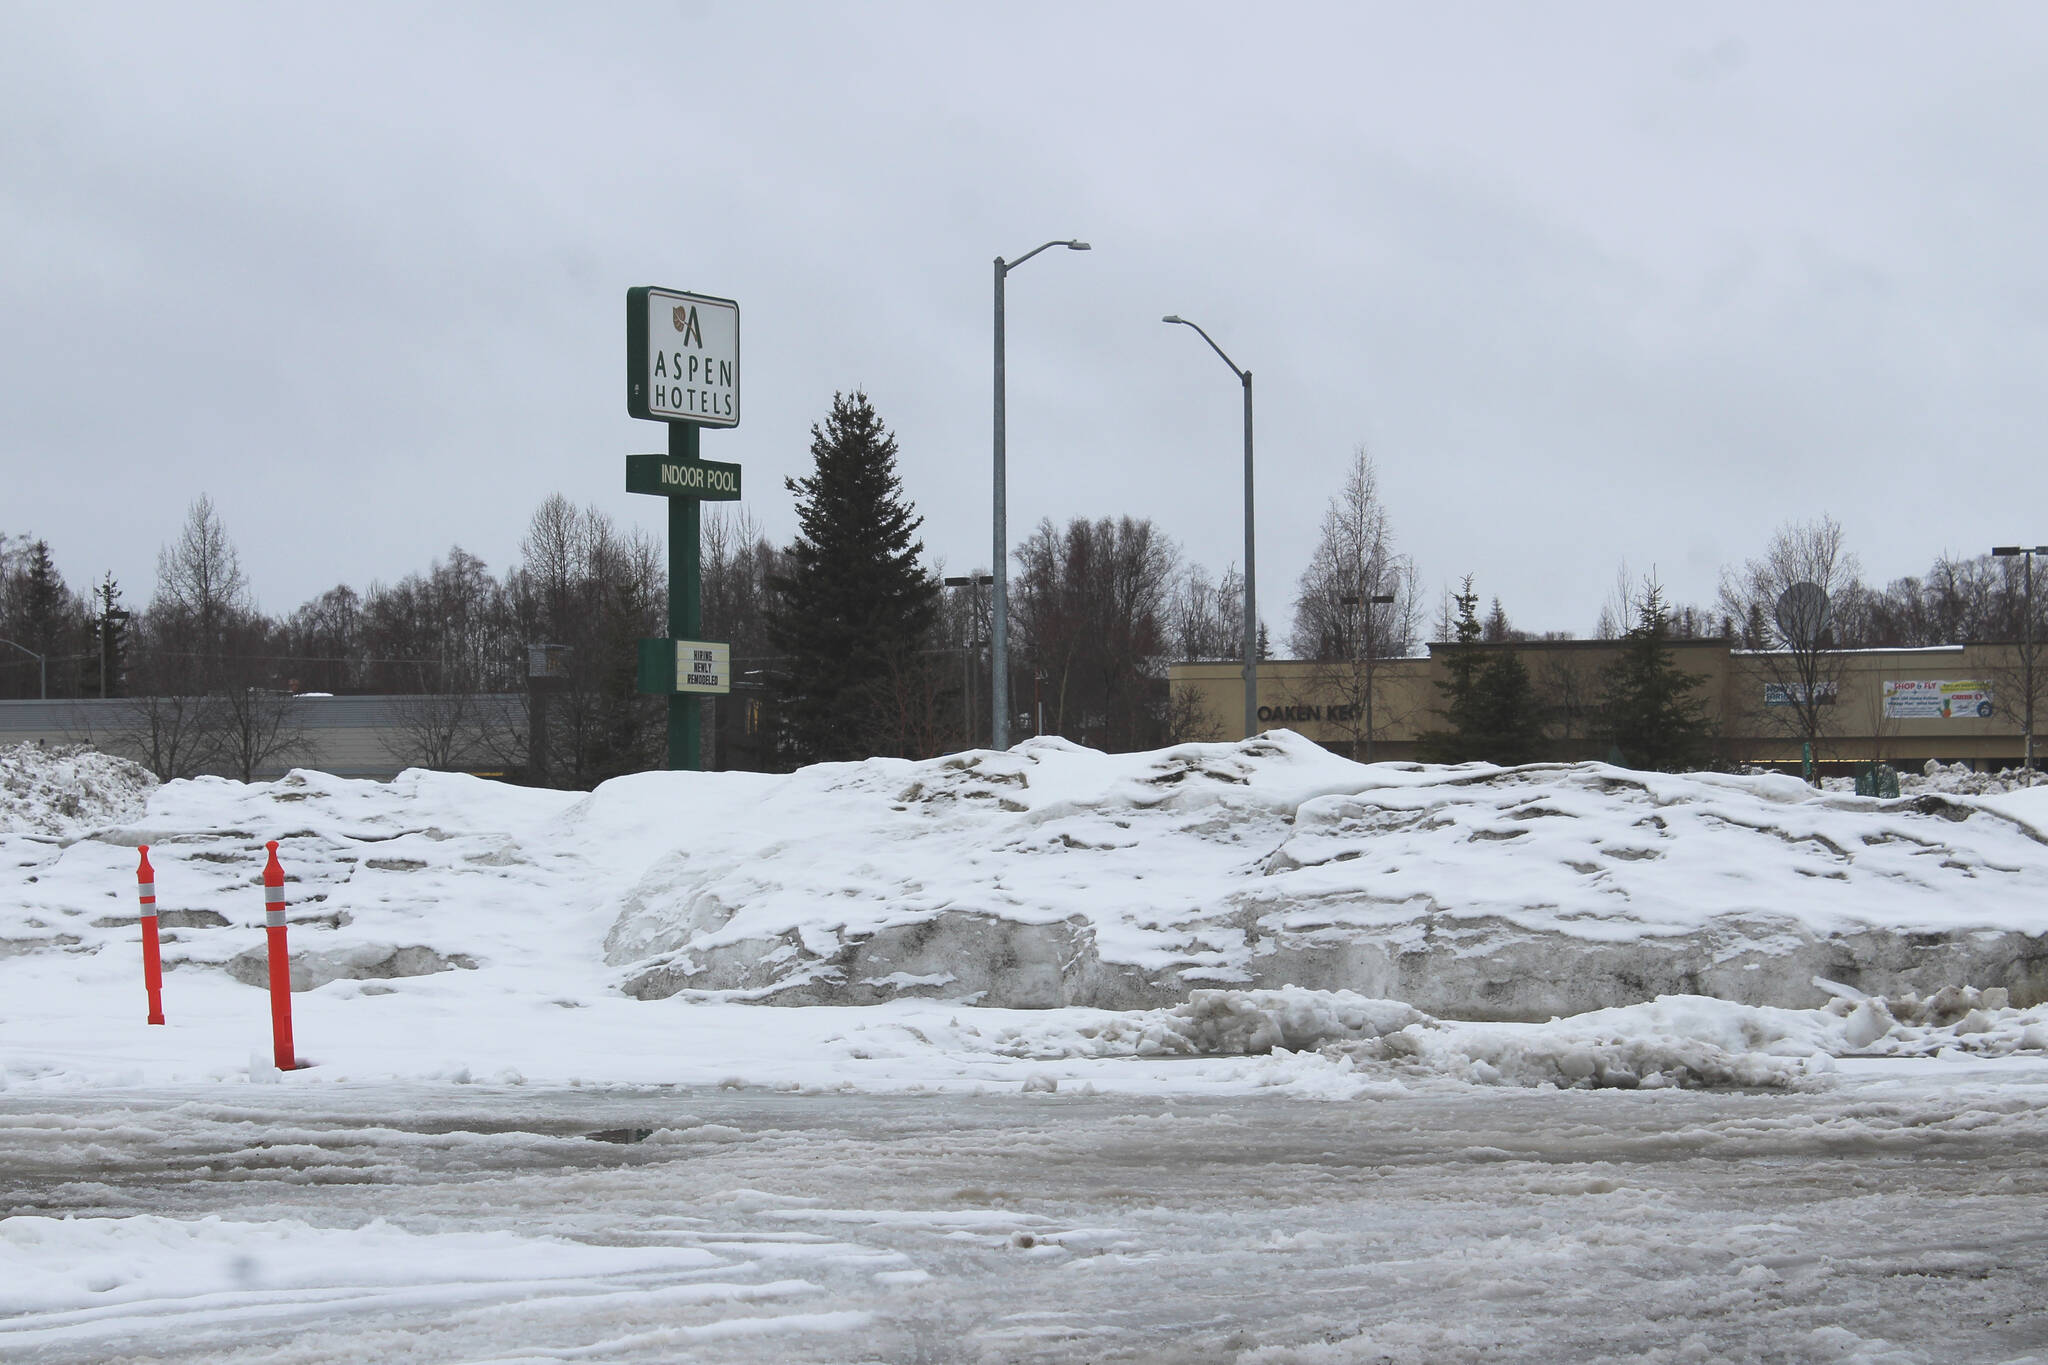 Snow collects in a lot near the Aspen Hotel on Thursday, March 10, 2022, in Soldotna, Alaska. The lot is the site of a planned parking lot by the City of Soldotna. (Ashlyn O’Hara/Peninsula Clarion)